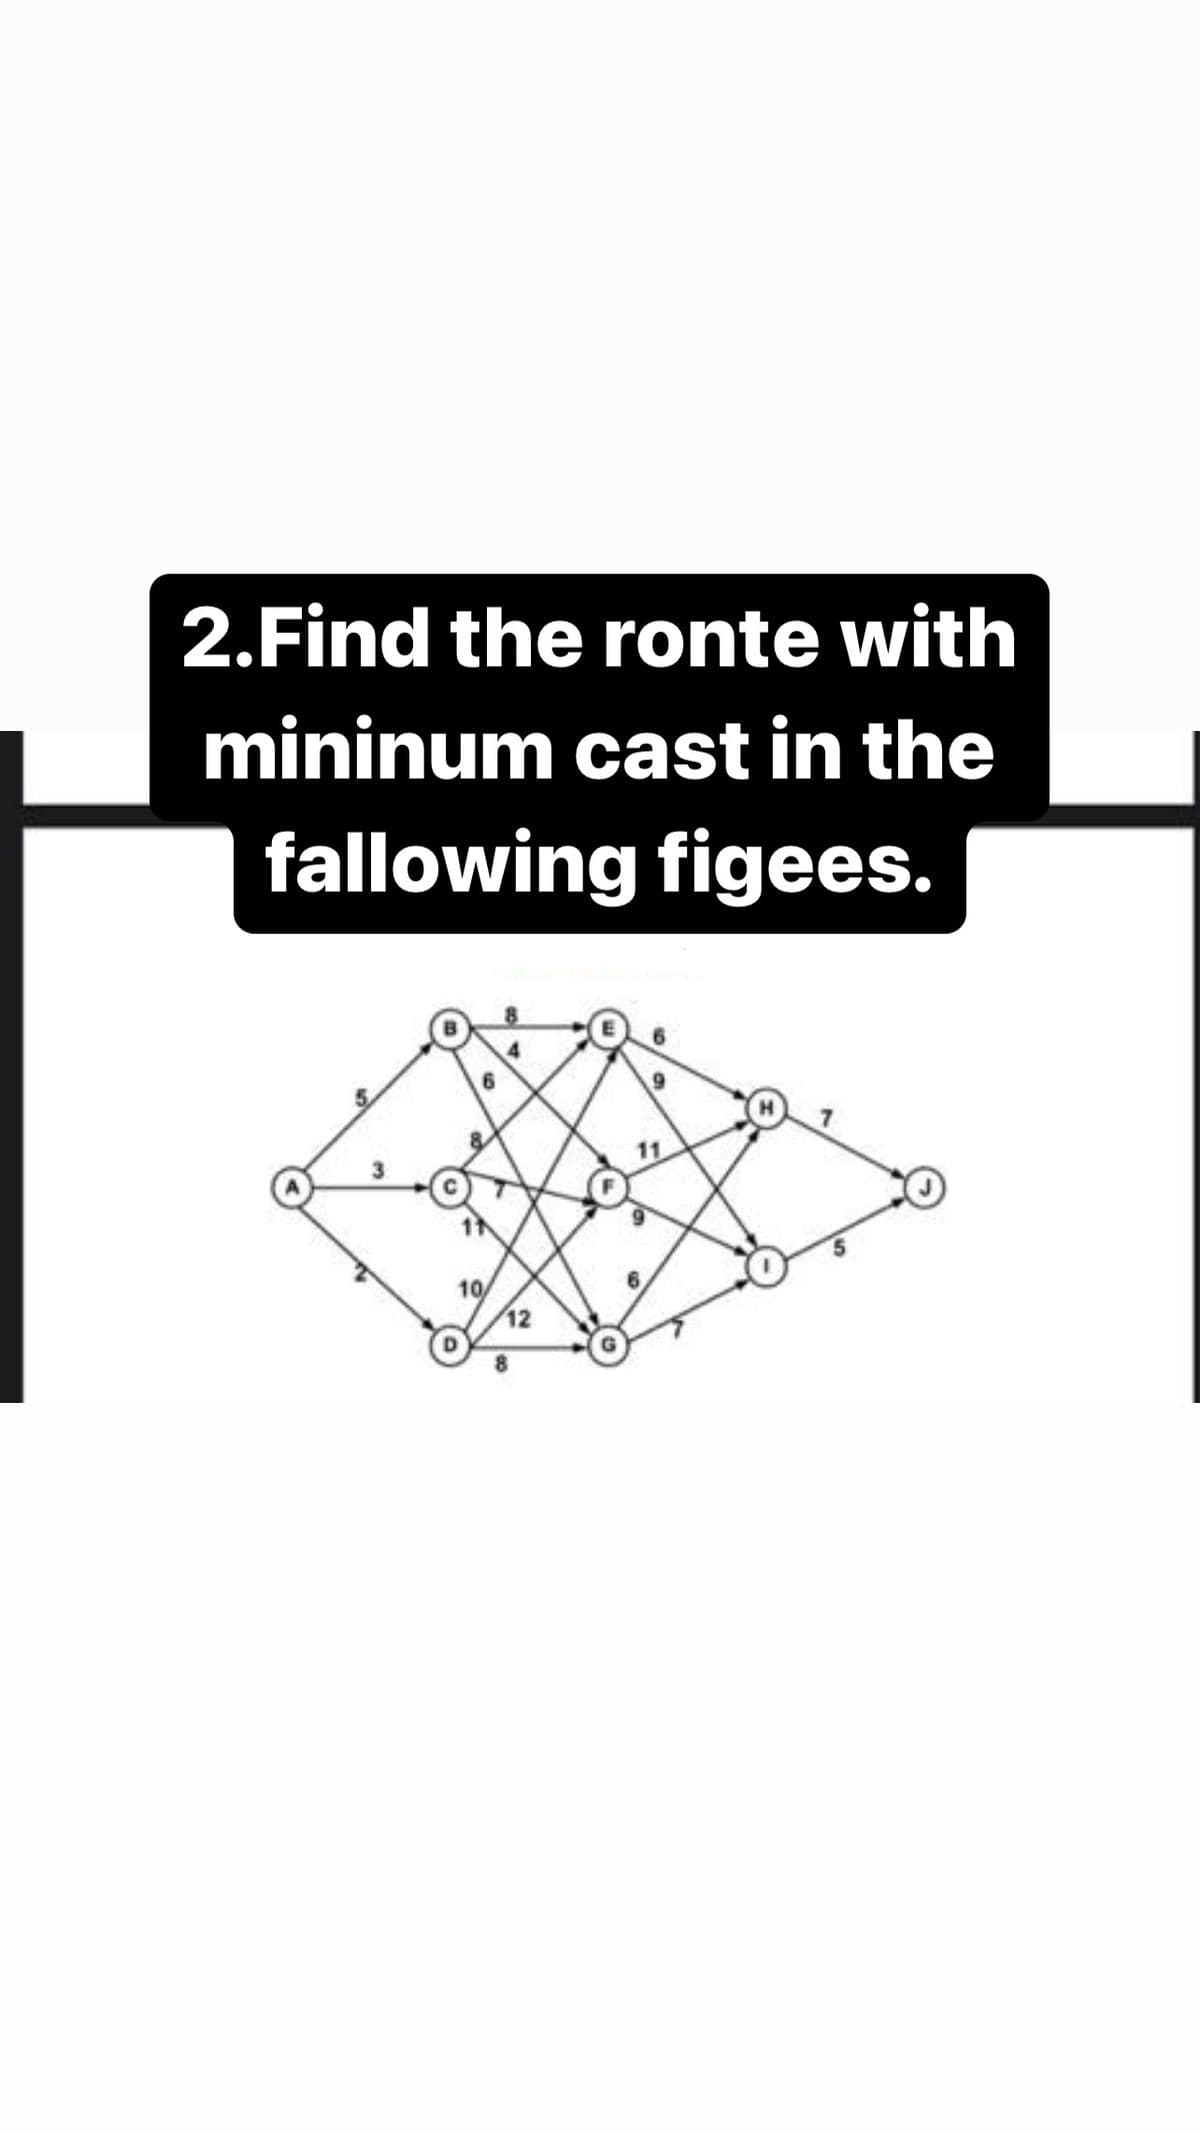 2.Find the ronte with
mininum cast in the
fallowing figees.
10/
12